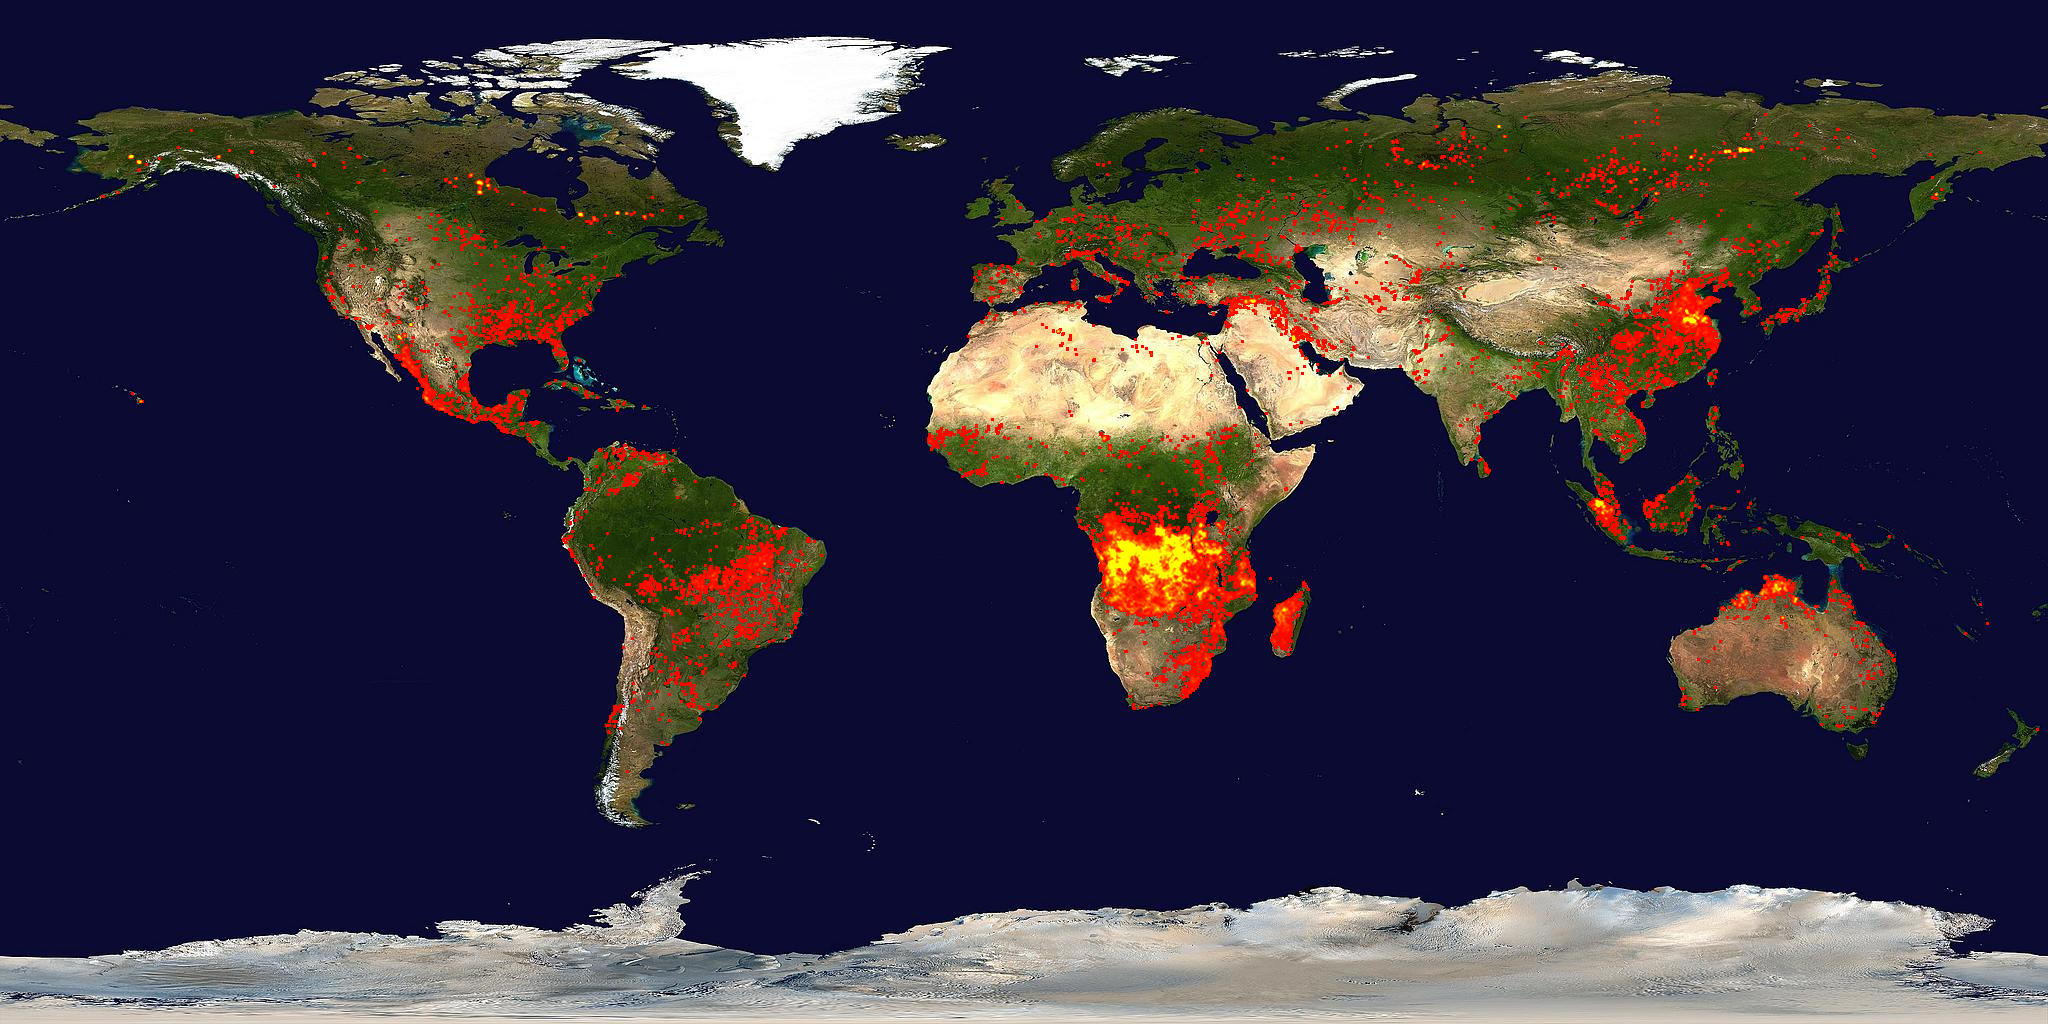 Global fire activity from the last 10 days ending on June 28 2013.